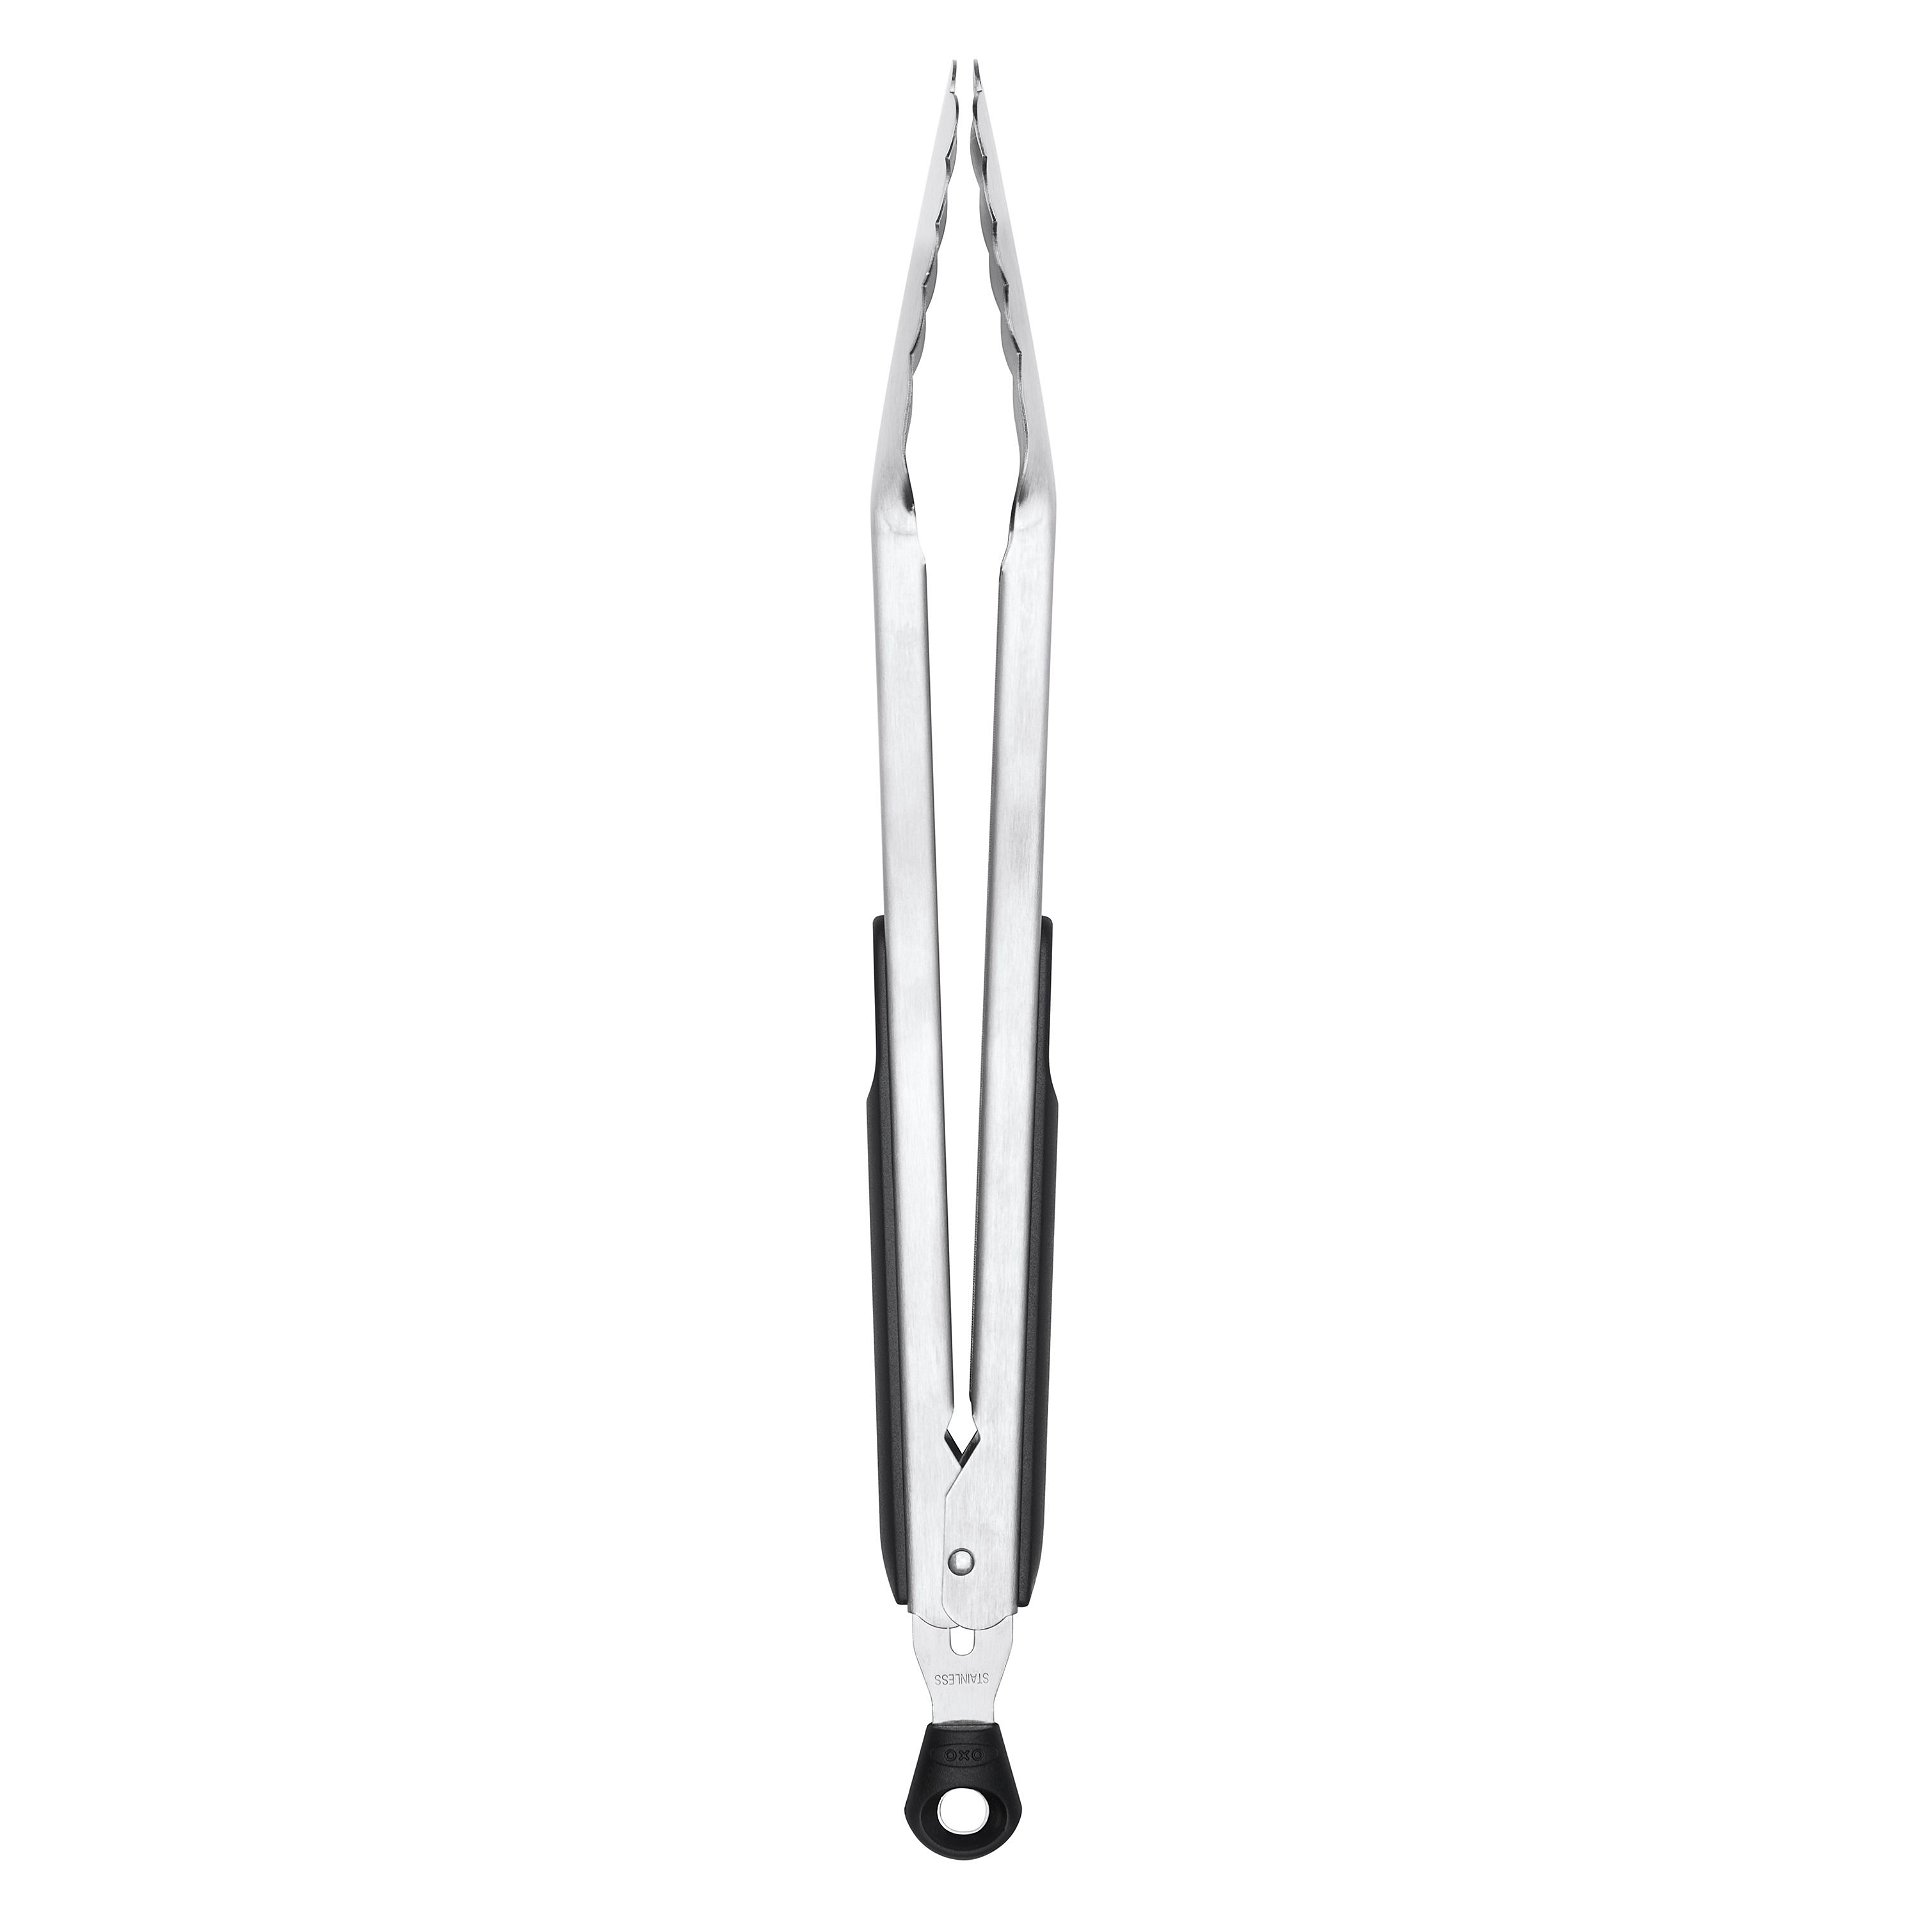 OXO Good Grips 16-in. Stainless Steel Tongs